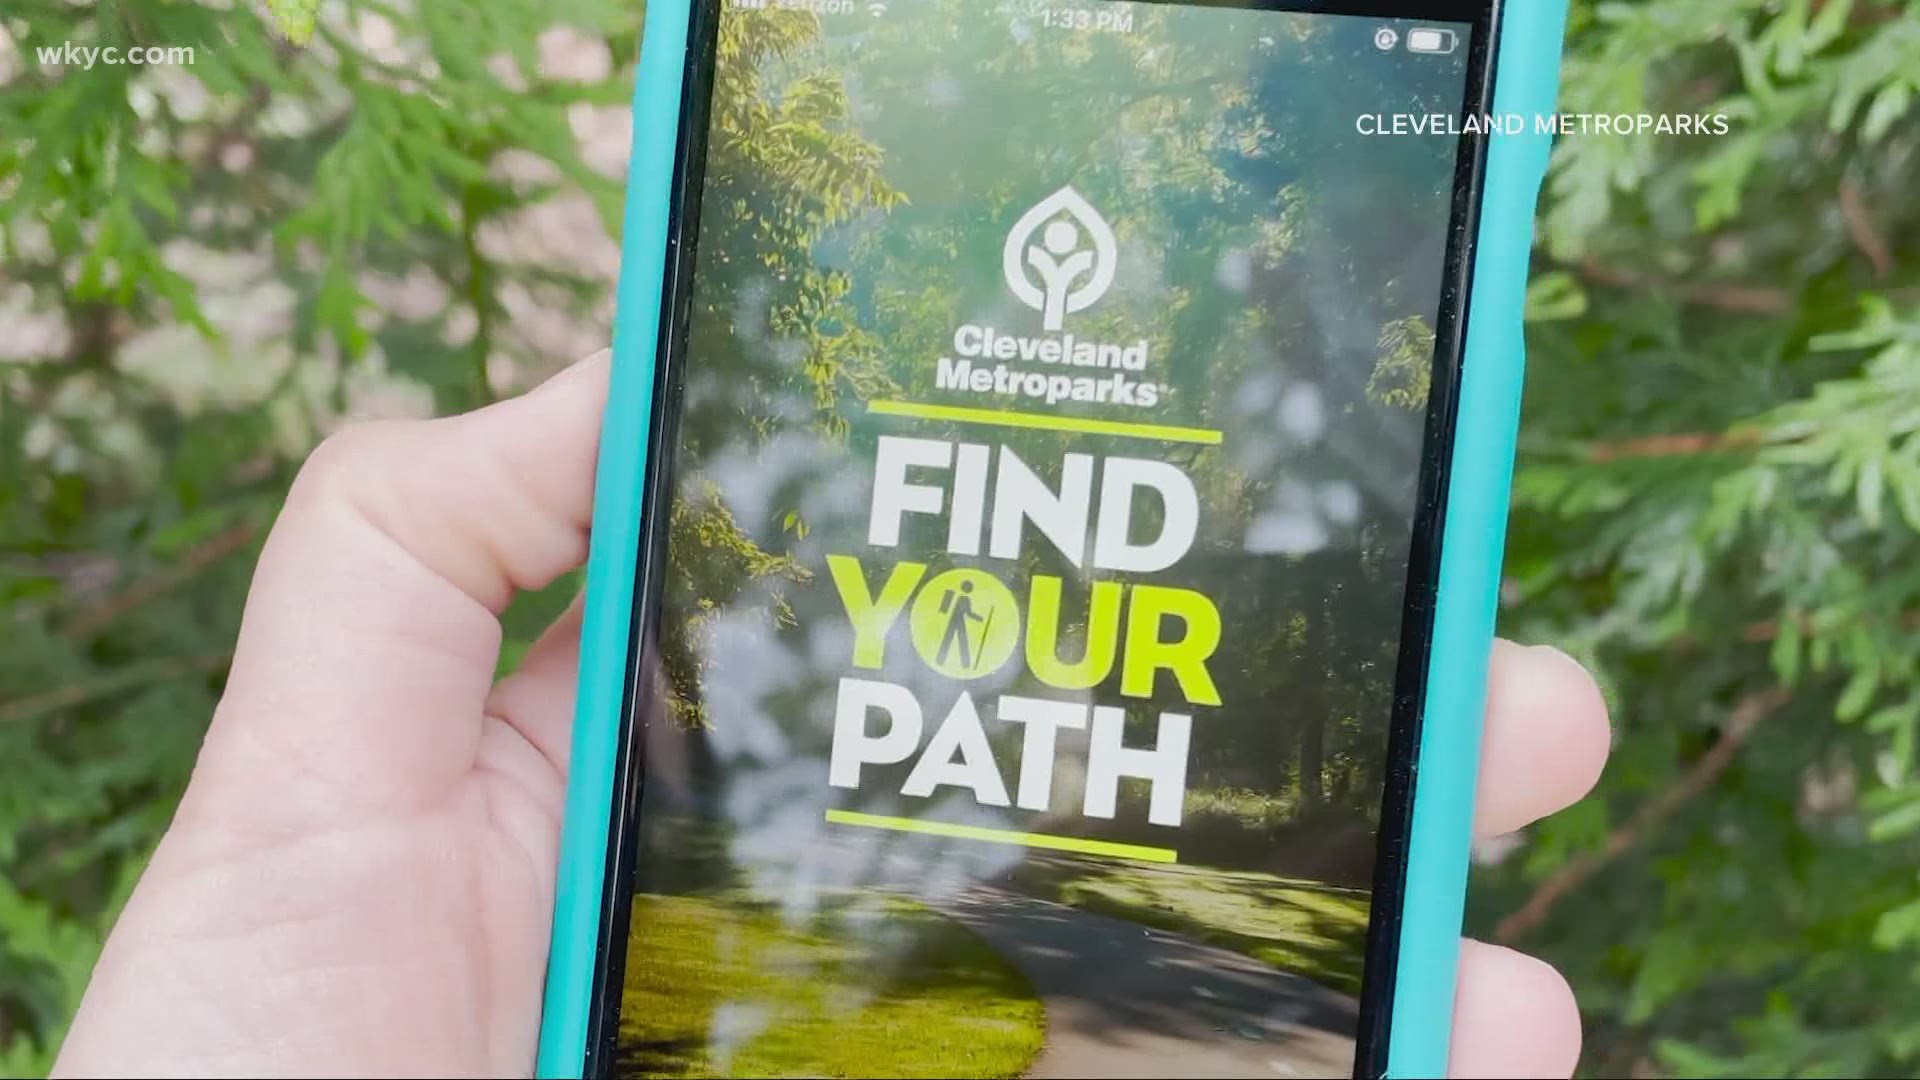 There's a new app available from the Cleveland Metroparks on the heels of a record-breaking year that brought more than 19.7 million visitors in 2020.